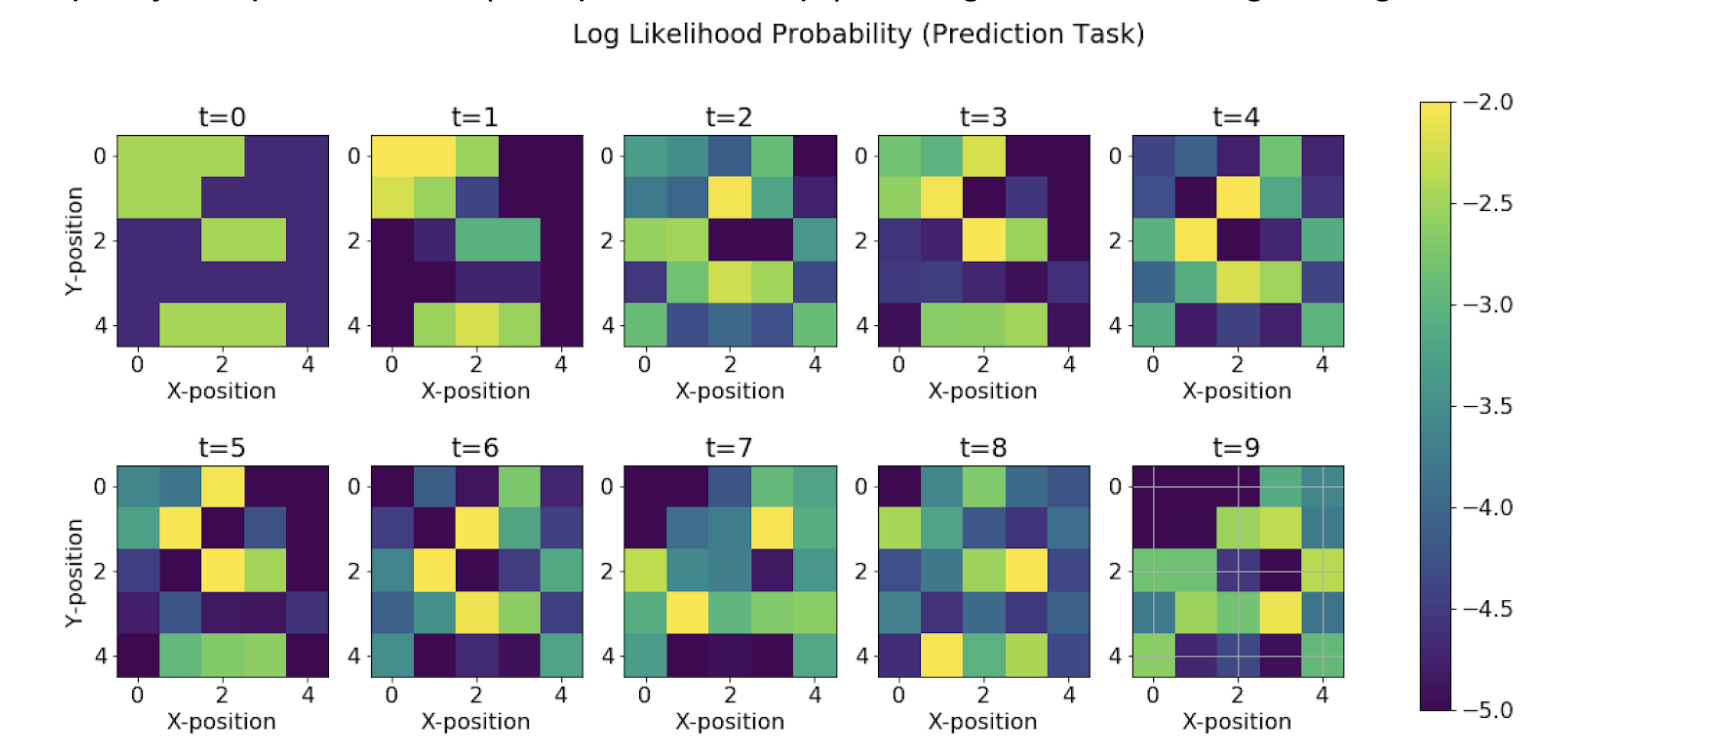 Log-Likelihood of the normalized probabilities estimated for each state (ONLY bump)